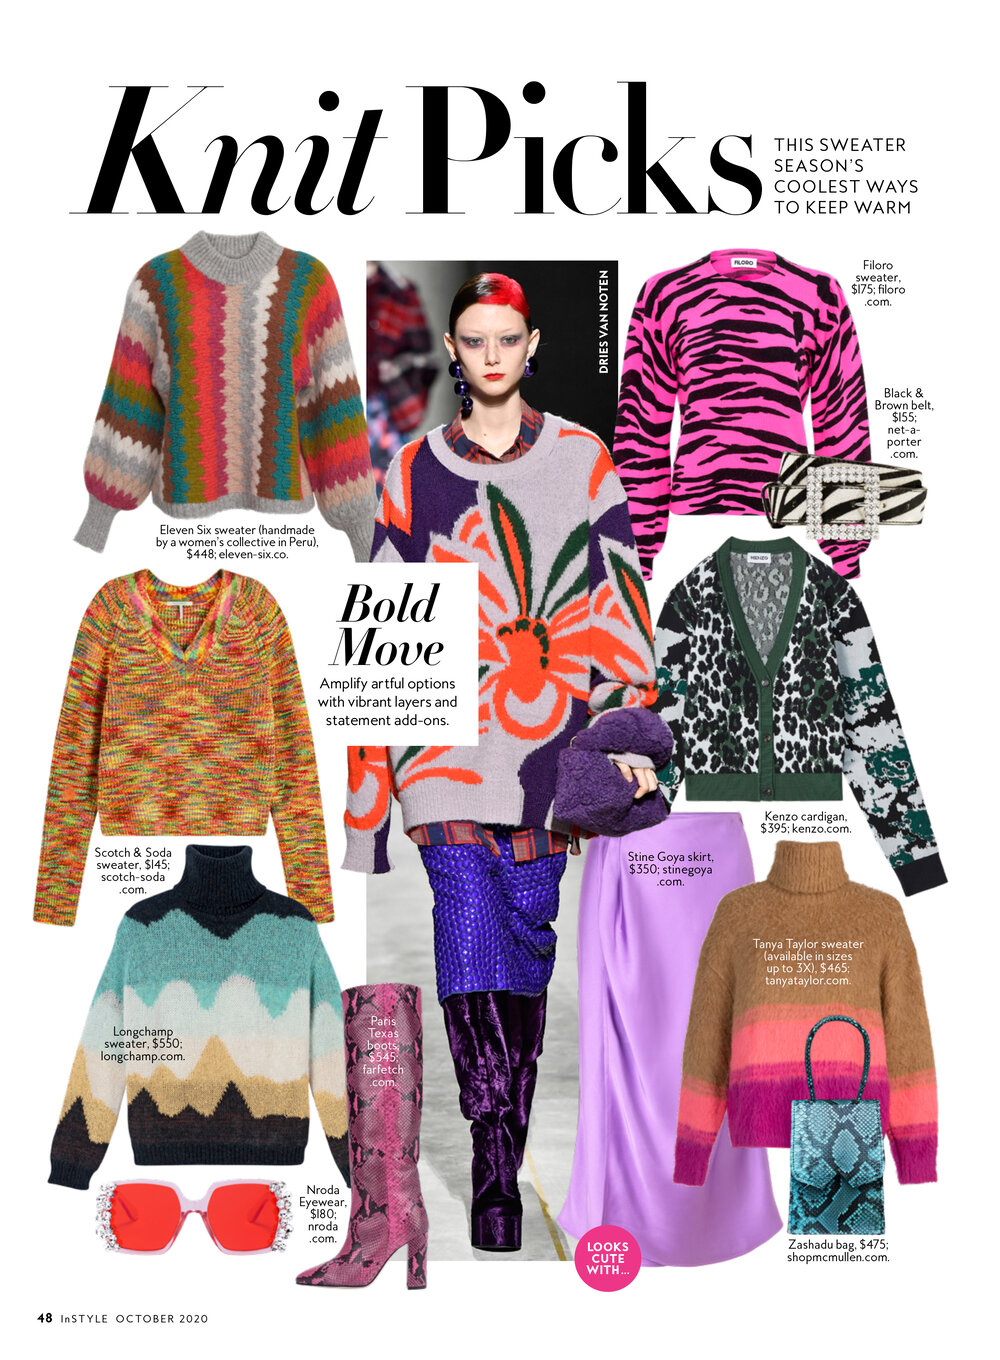 Our TIA Sweater in InStyleOctober, 2020 | InStyle Print USA